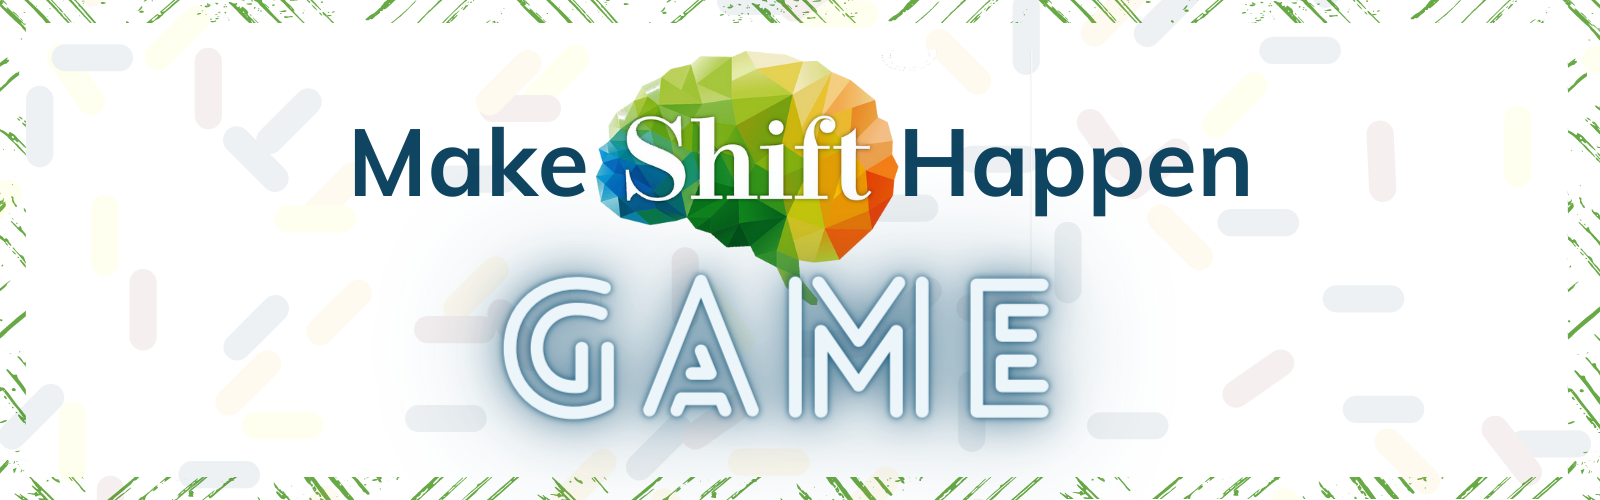 making-shift-happen-game-page